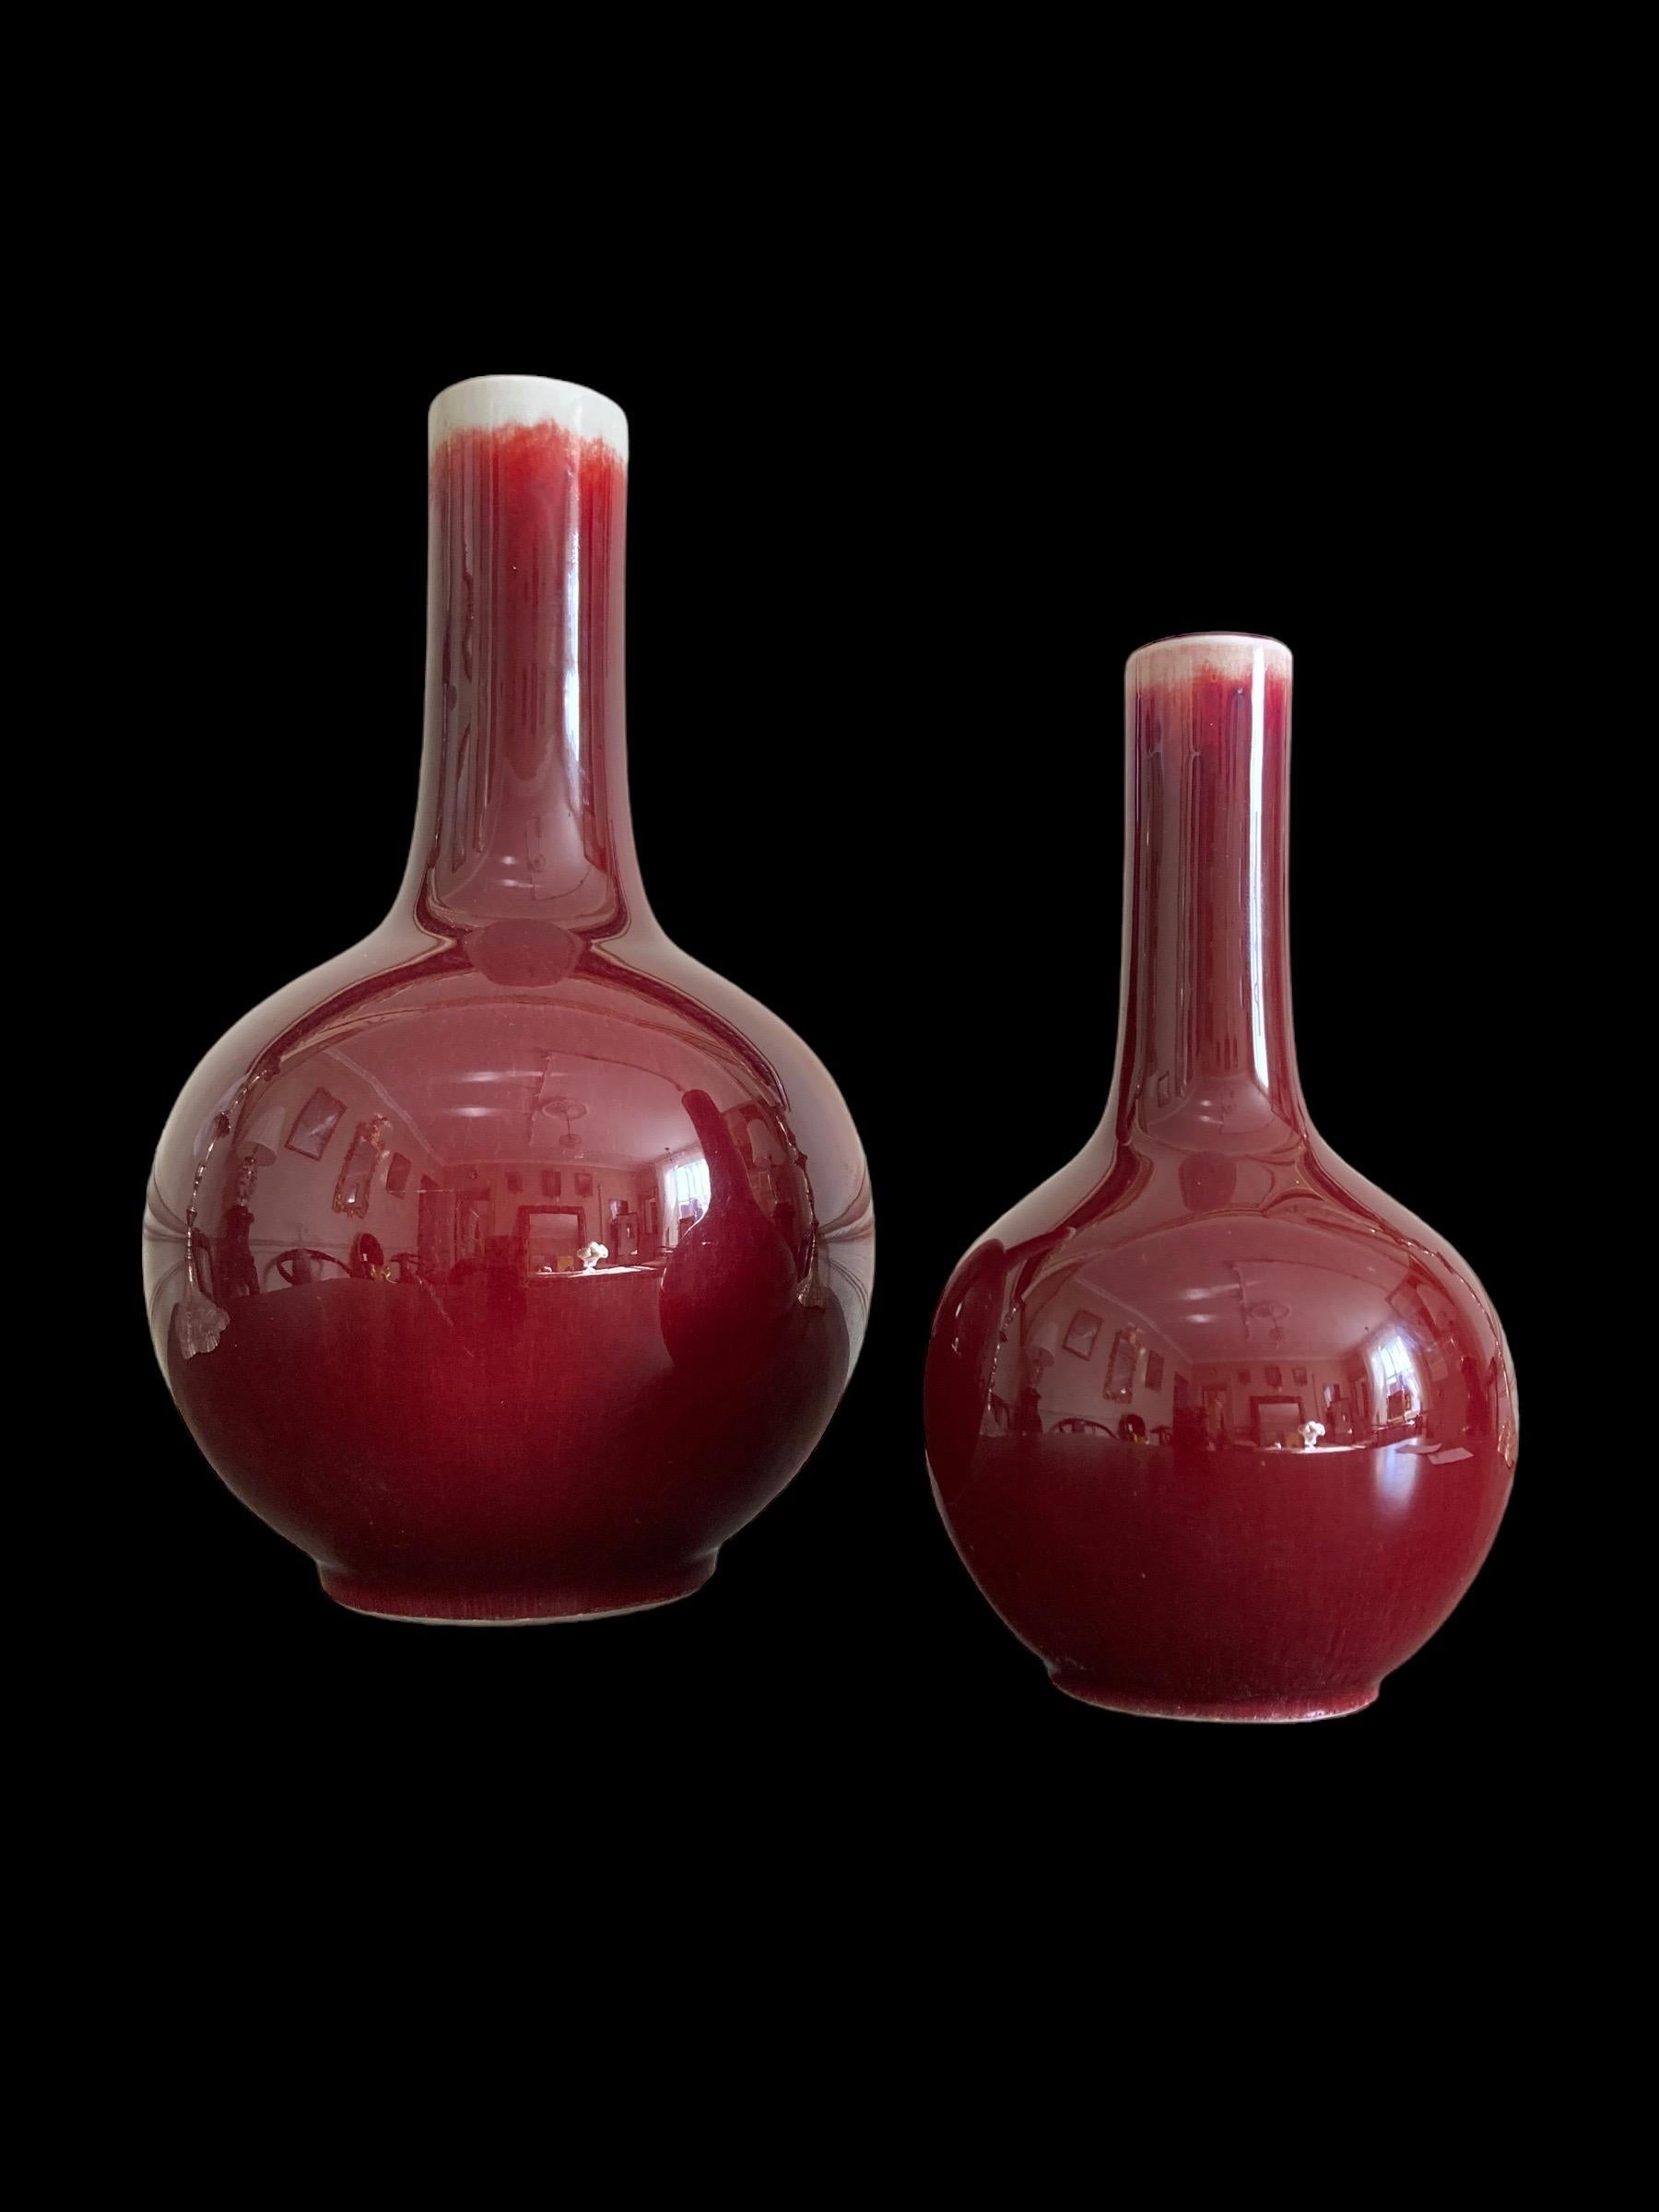 A beautiful pair of Chinese red glazed long neck Sang De Bouef flambe flask vases and varying heights.

Larger vase 23.5cm x 14cm
Smaller vase 16.5cm x 9cm